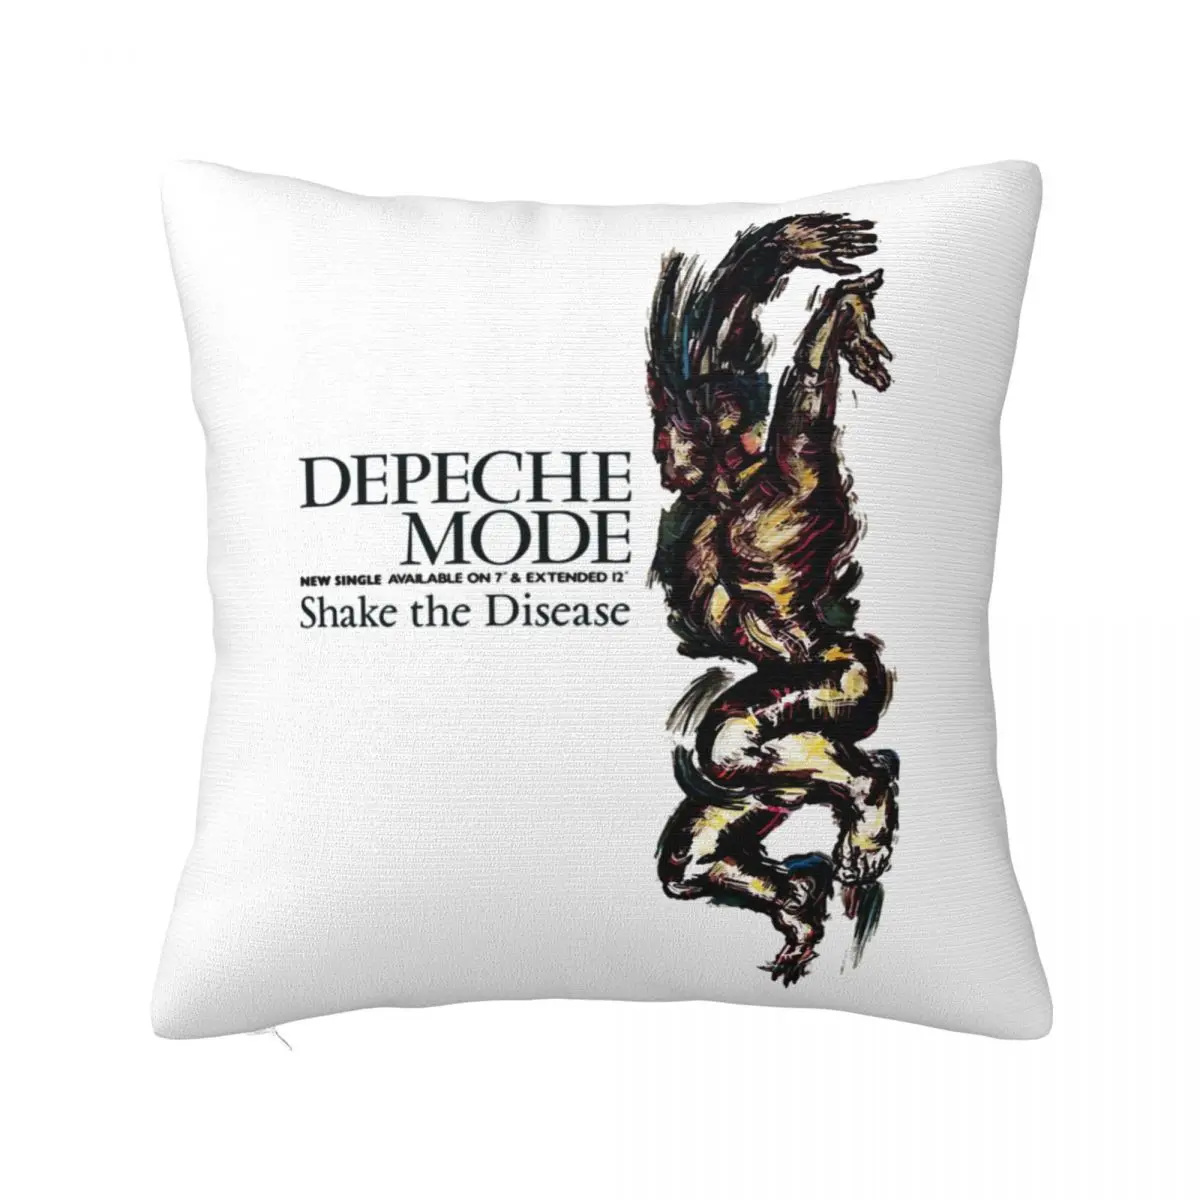 

Depeche Cool Mode Pillowcase Soft Fabric Cushion Cover Gift Throw Pillow Case Cover Home Zippered 45*45cm